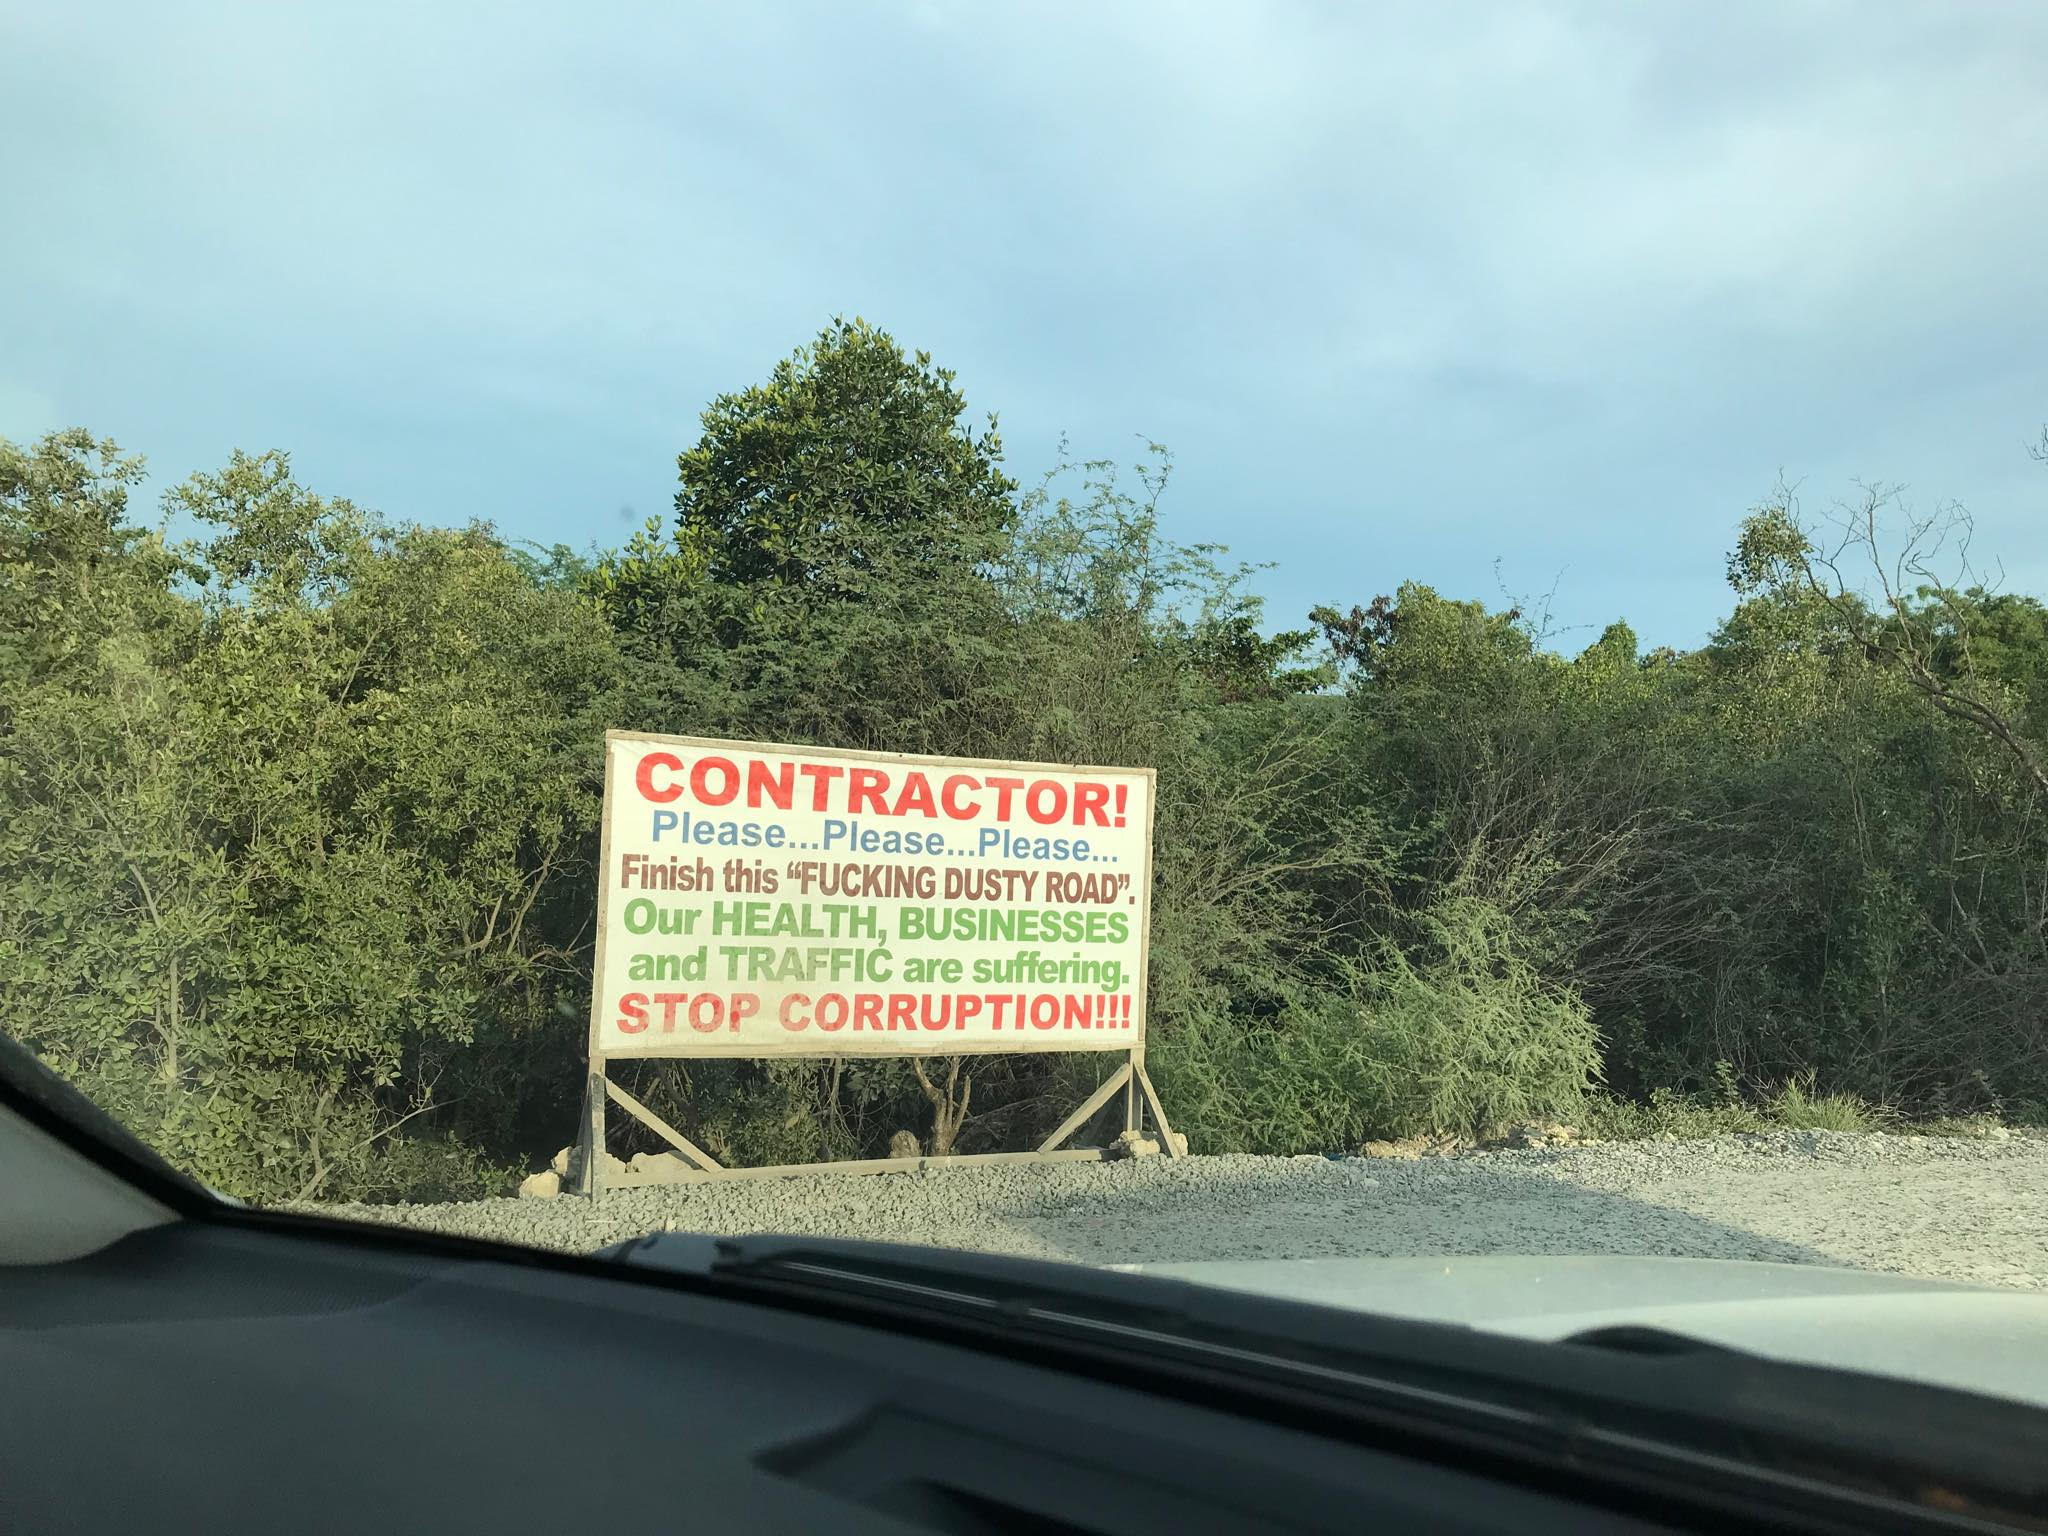 LOOK: Cebu citizen’s angry billboard message to contractor